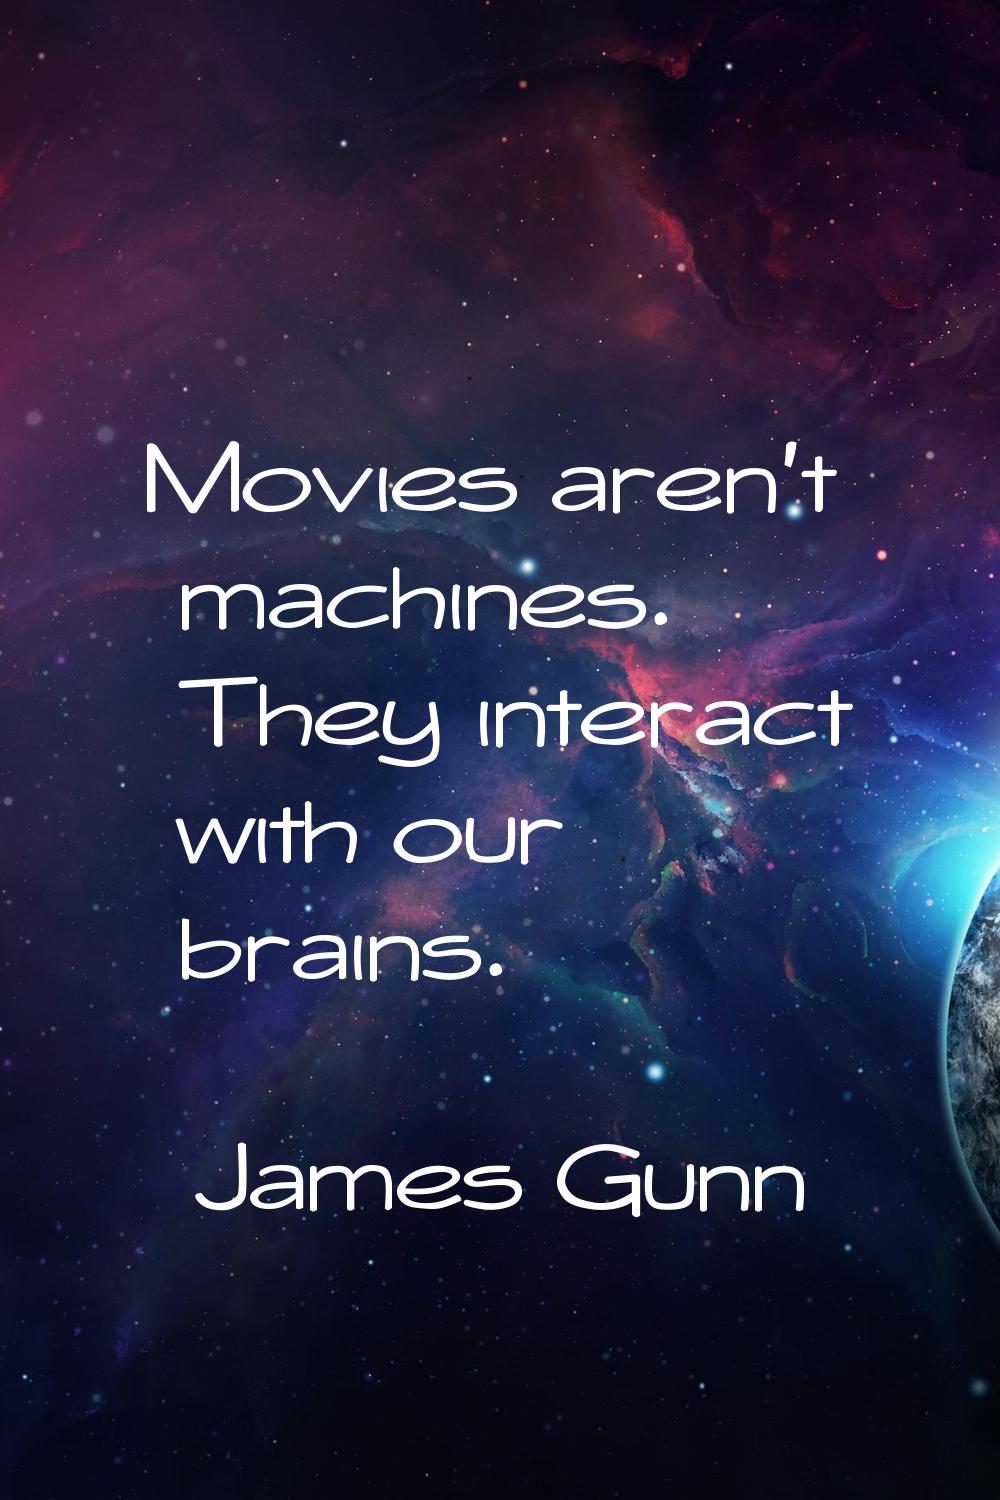 Movies aren't machines. They interact with our brains.